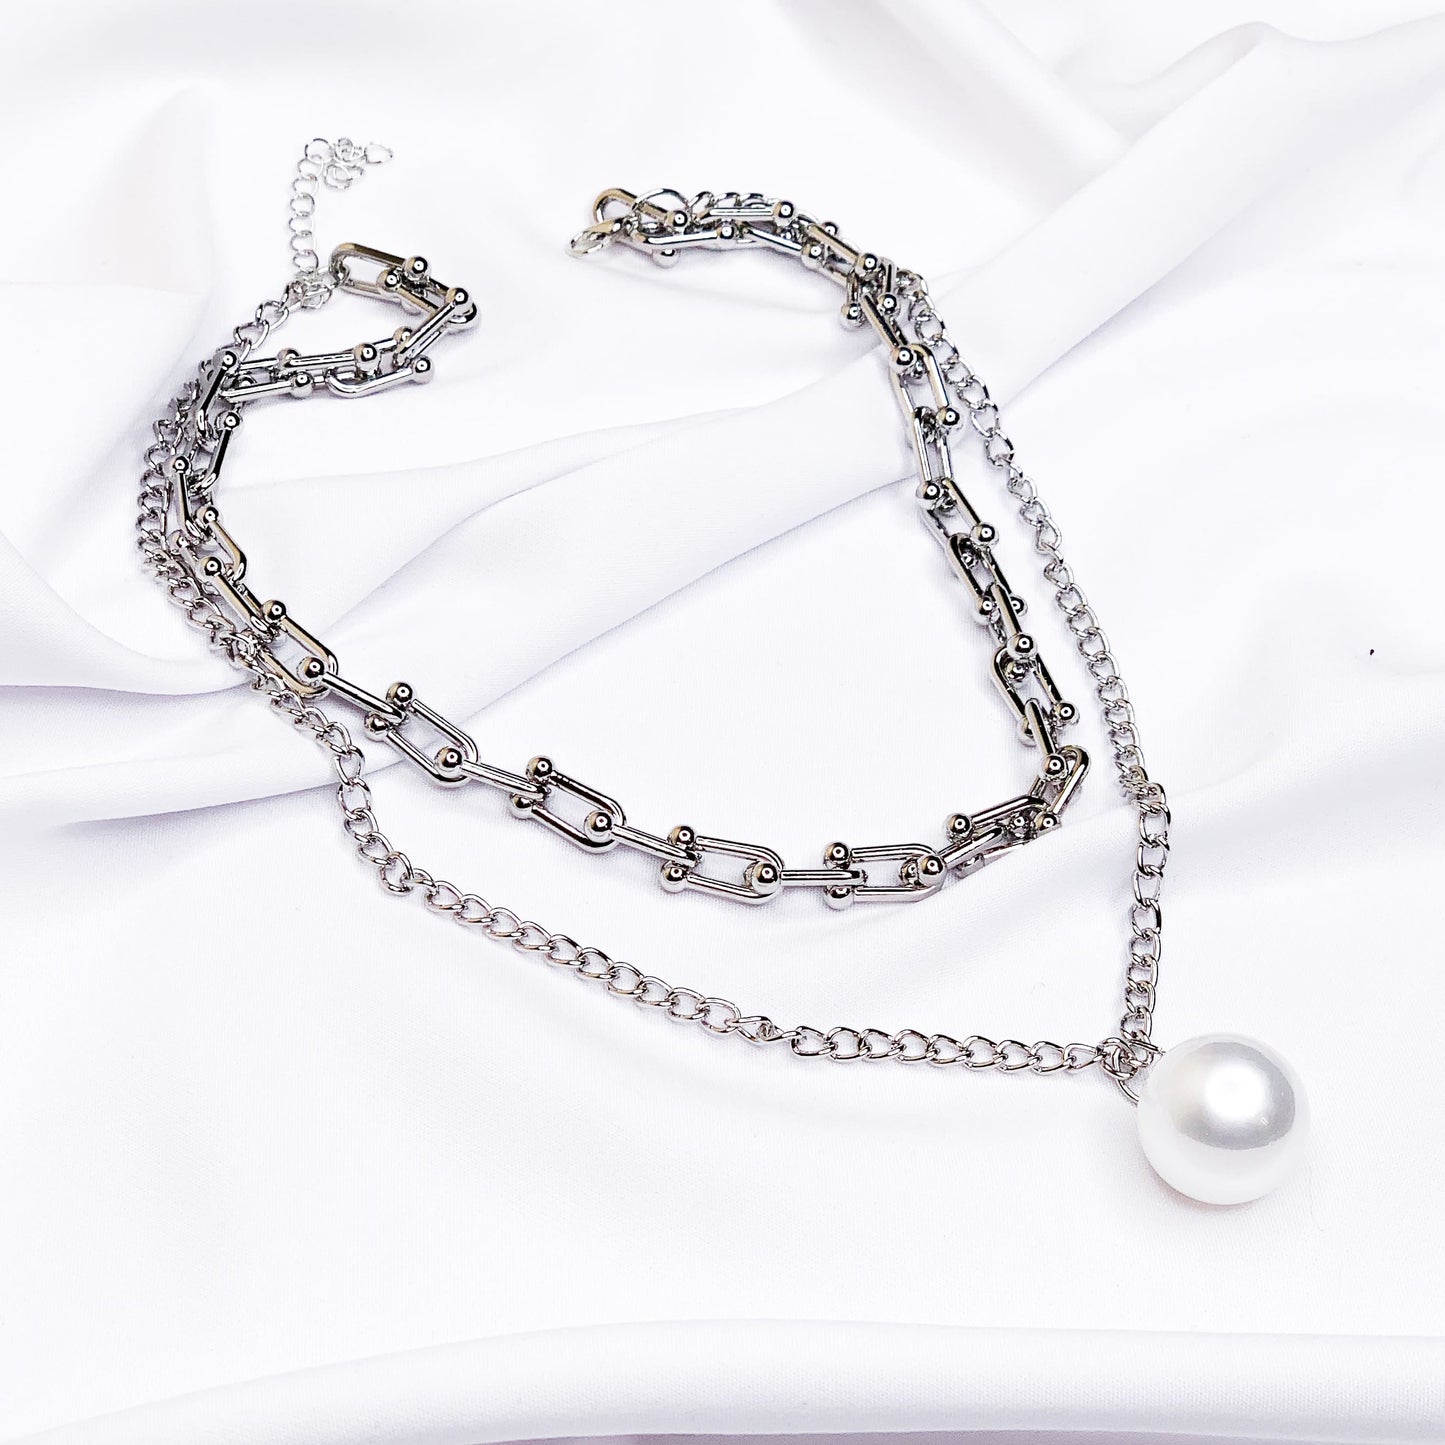 Chain necklace with ball pendant